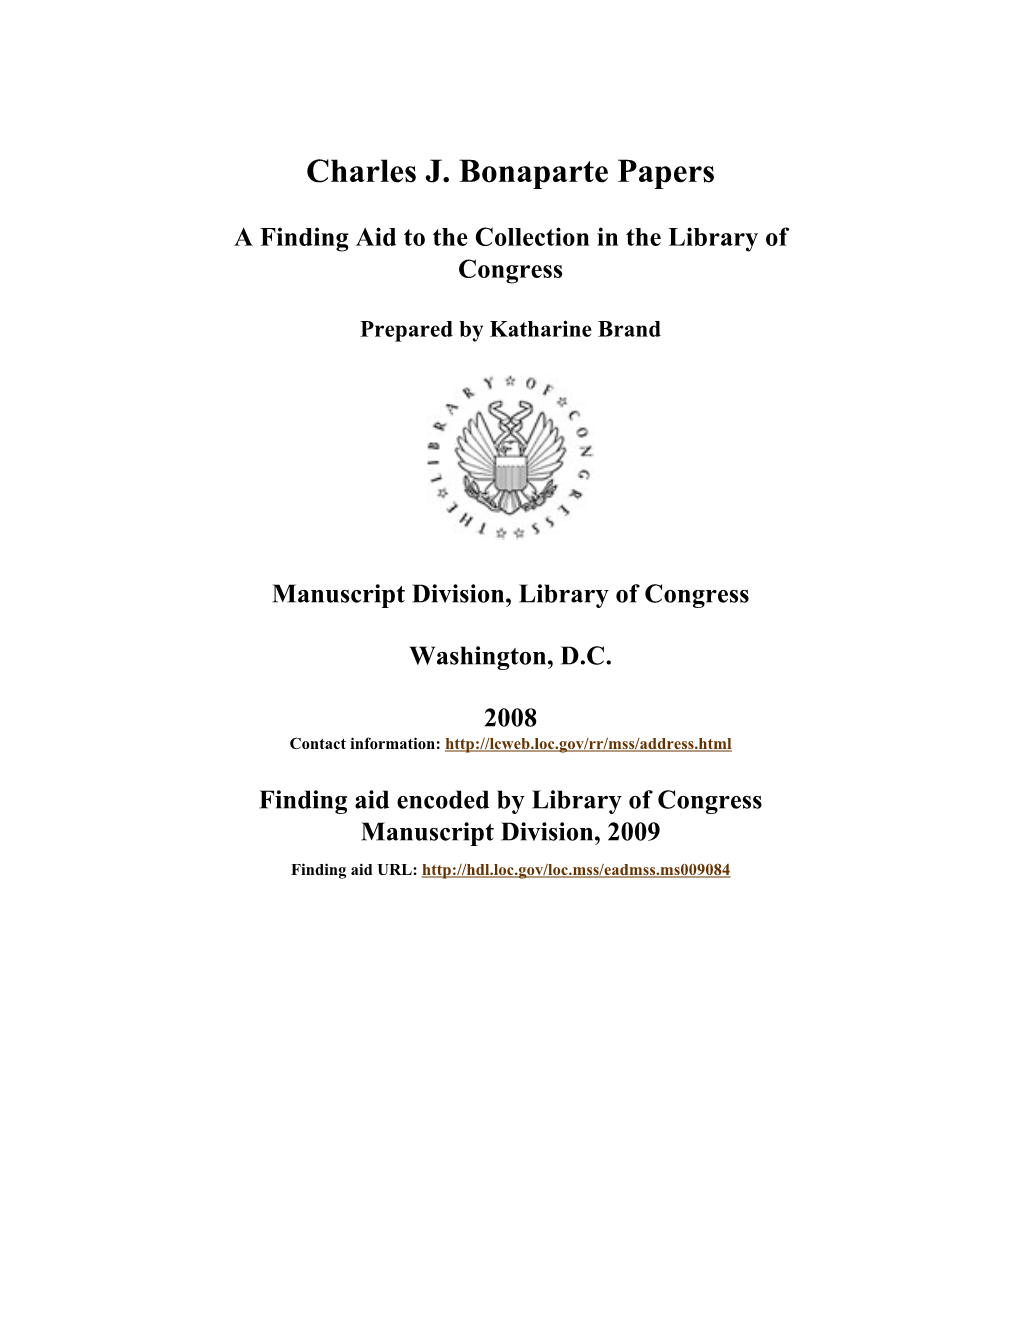 Charles J. Bonaparte Papers [Finding Aid]. Library of Congress. [PDF